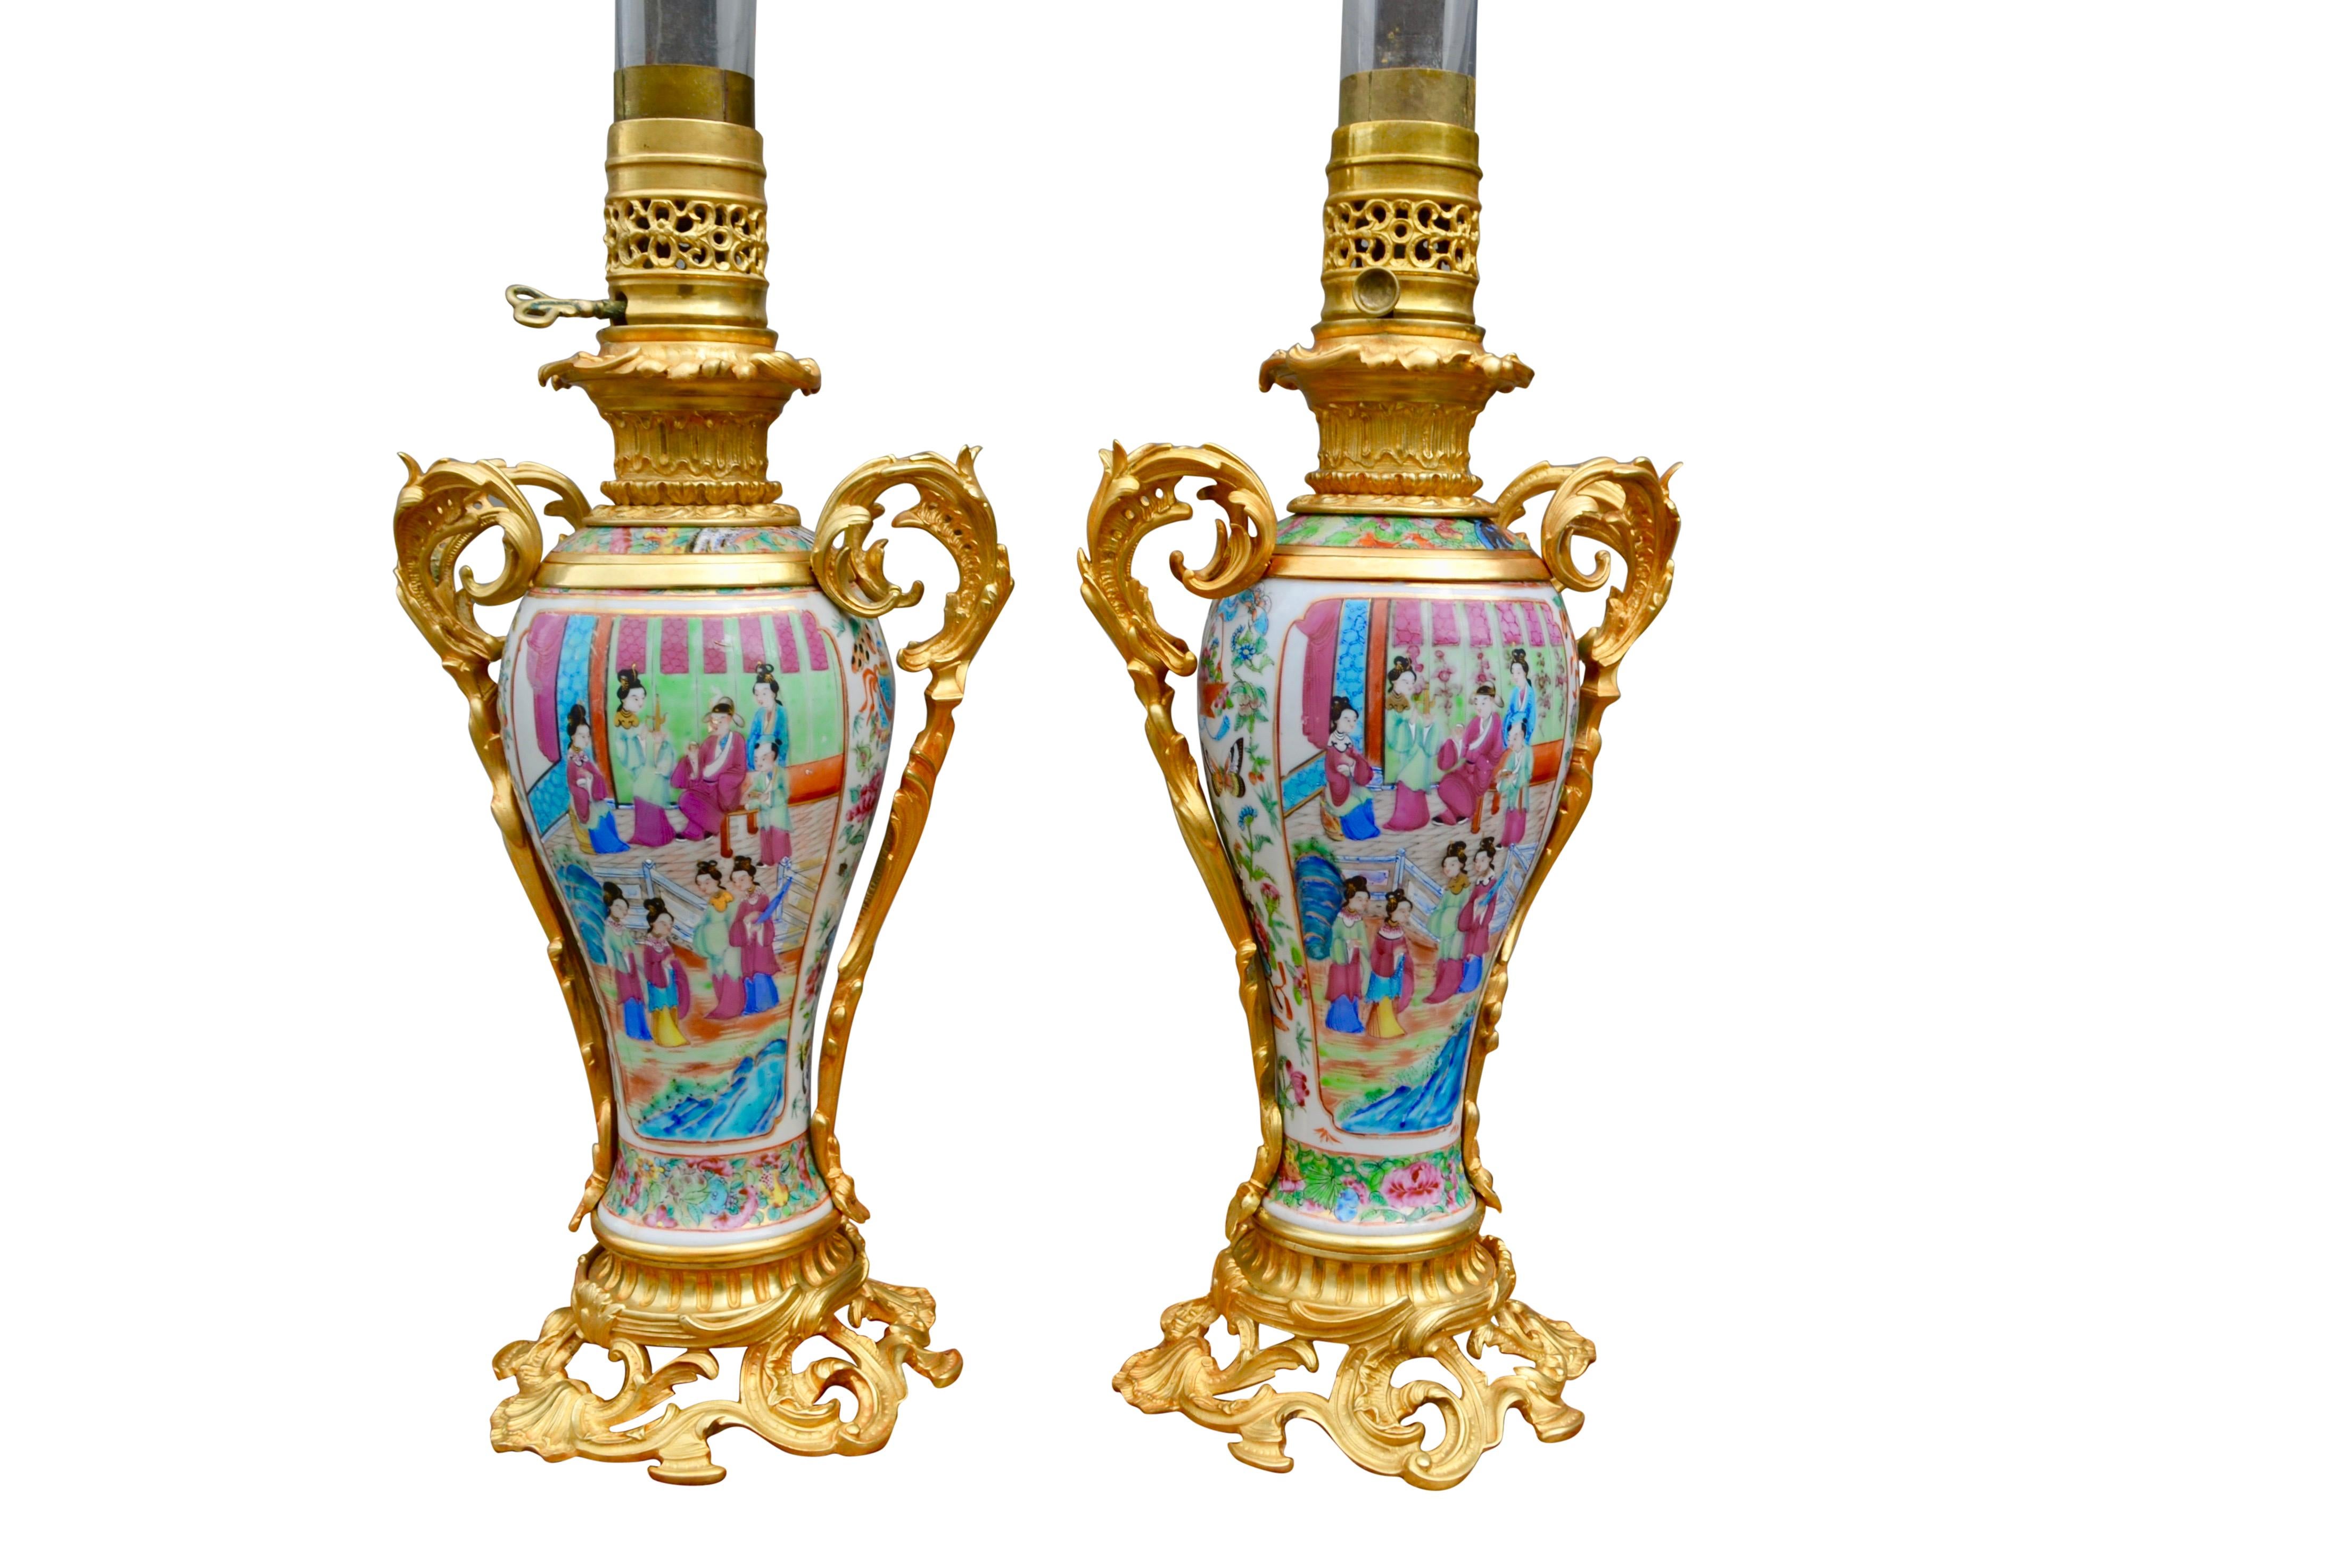 Rare Pair of Famille Rose Porcelain and Ormolu Napoleon III Oil Lamps For Sale 5